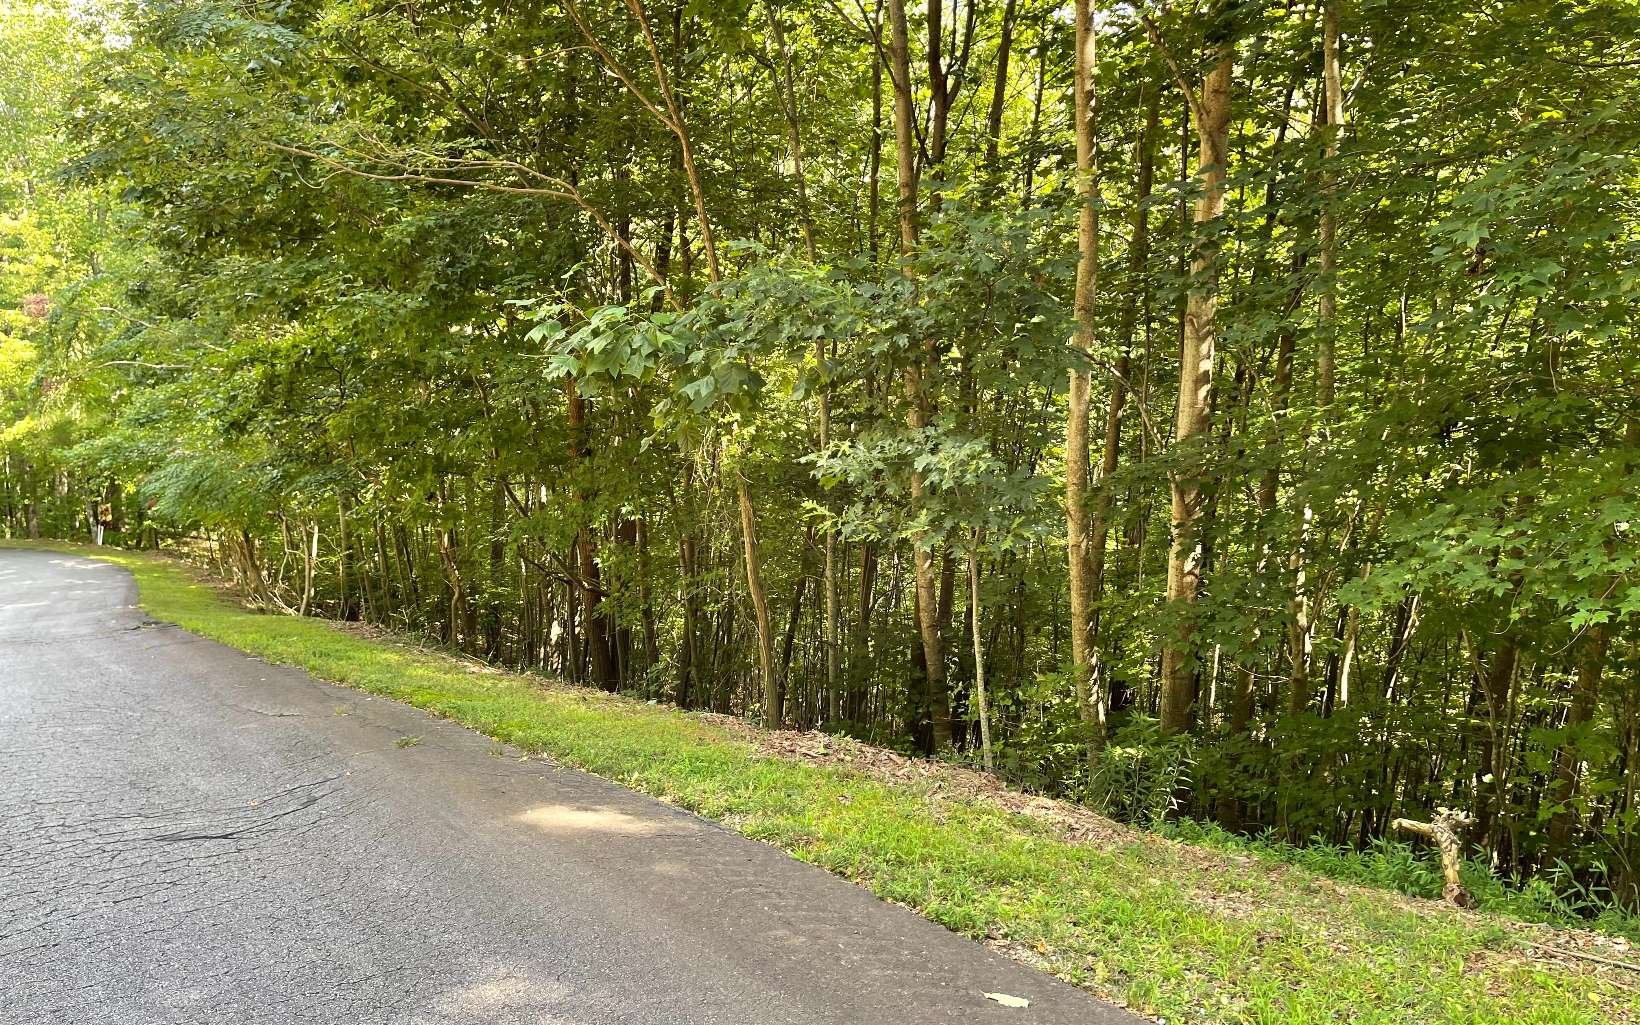 NORTH GEORGIA MOUNTAIN LOT IN PAVED SECLUDED SUBDIVISION!! This 2 acre lot in the Overlook of Young Harris subdivision offers great views year round with a little trimming, water, electric available, paved roads in PLUS it's close to Young Harris College, trout fishing, between Hiawassee and Blairsville.